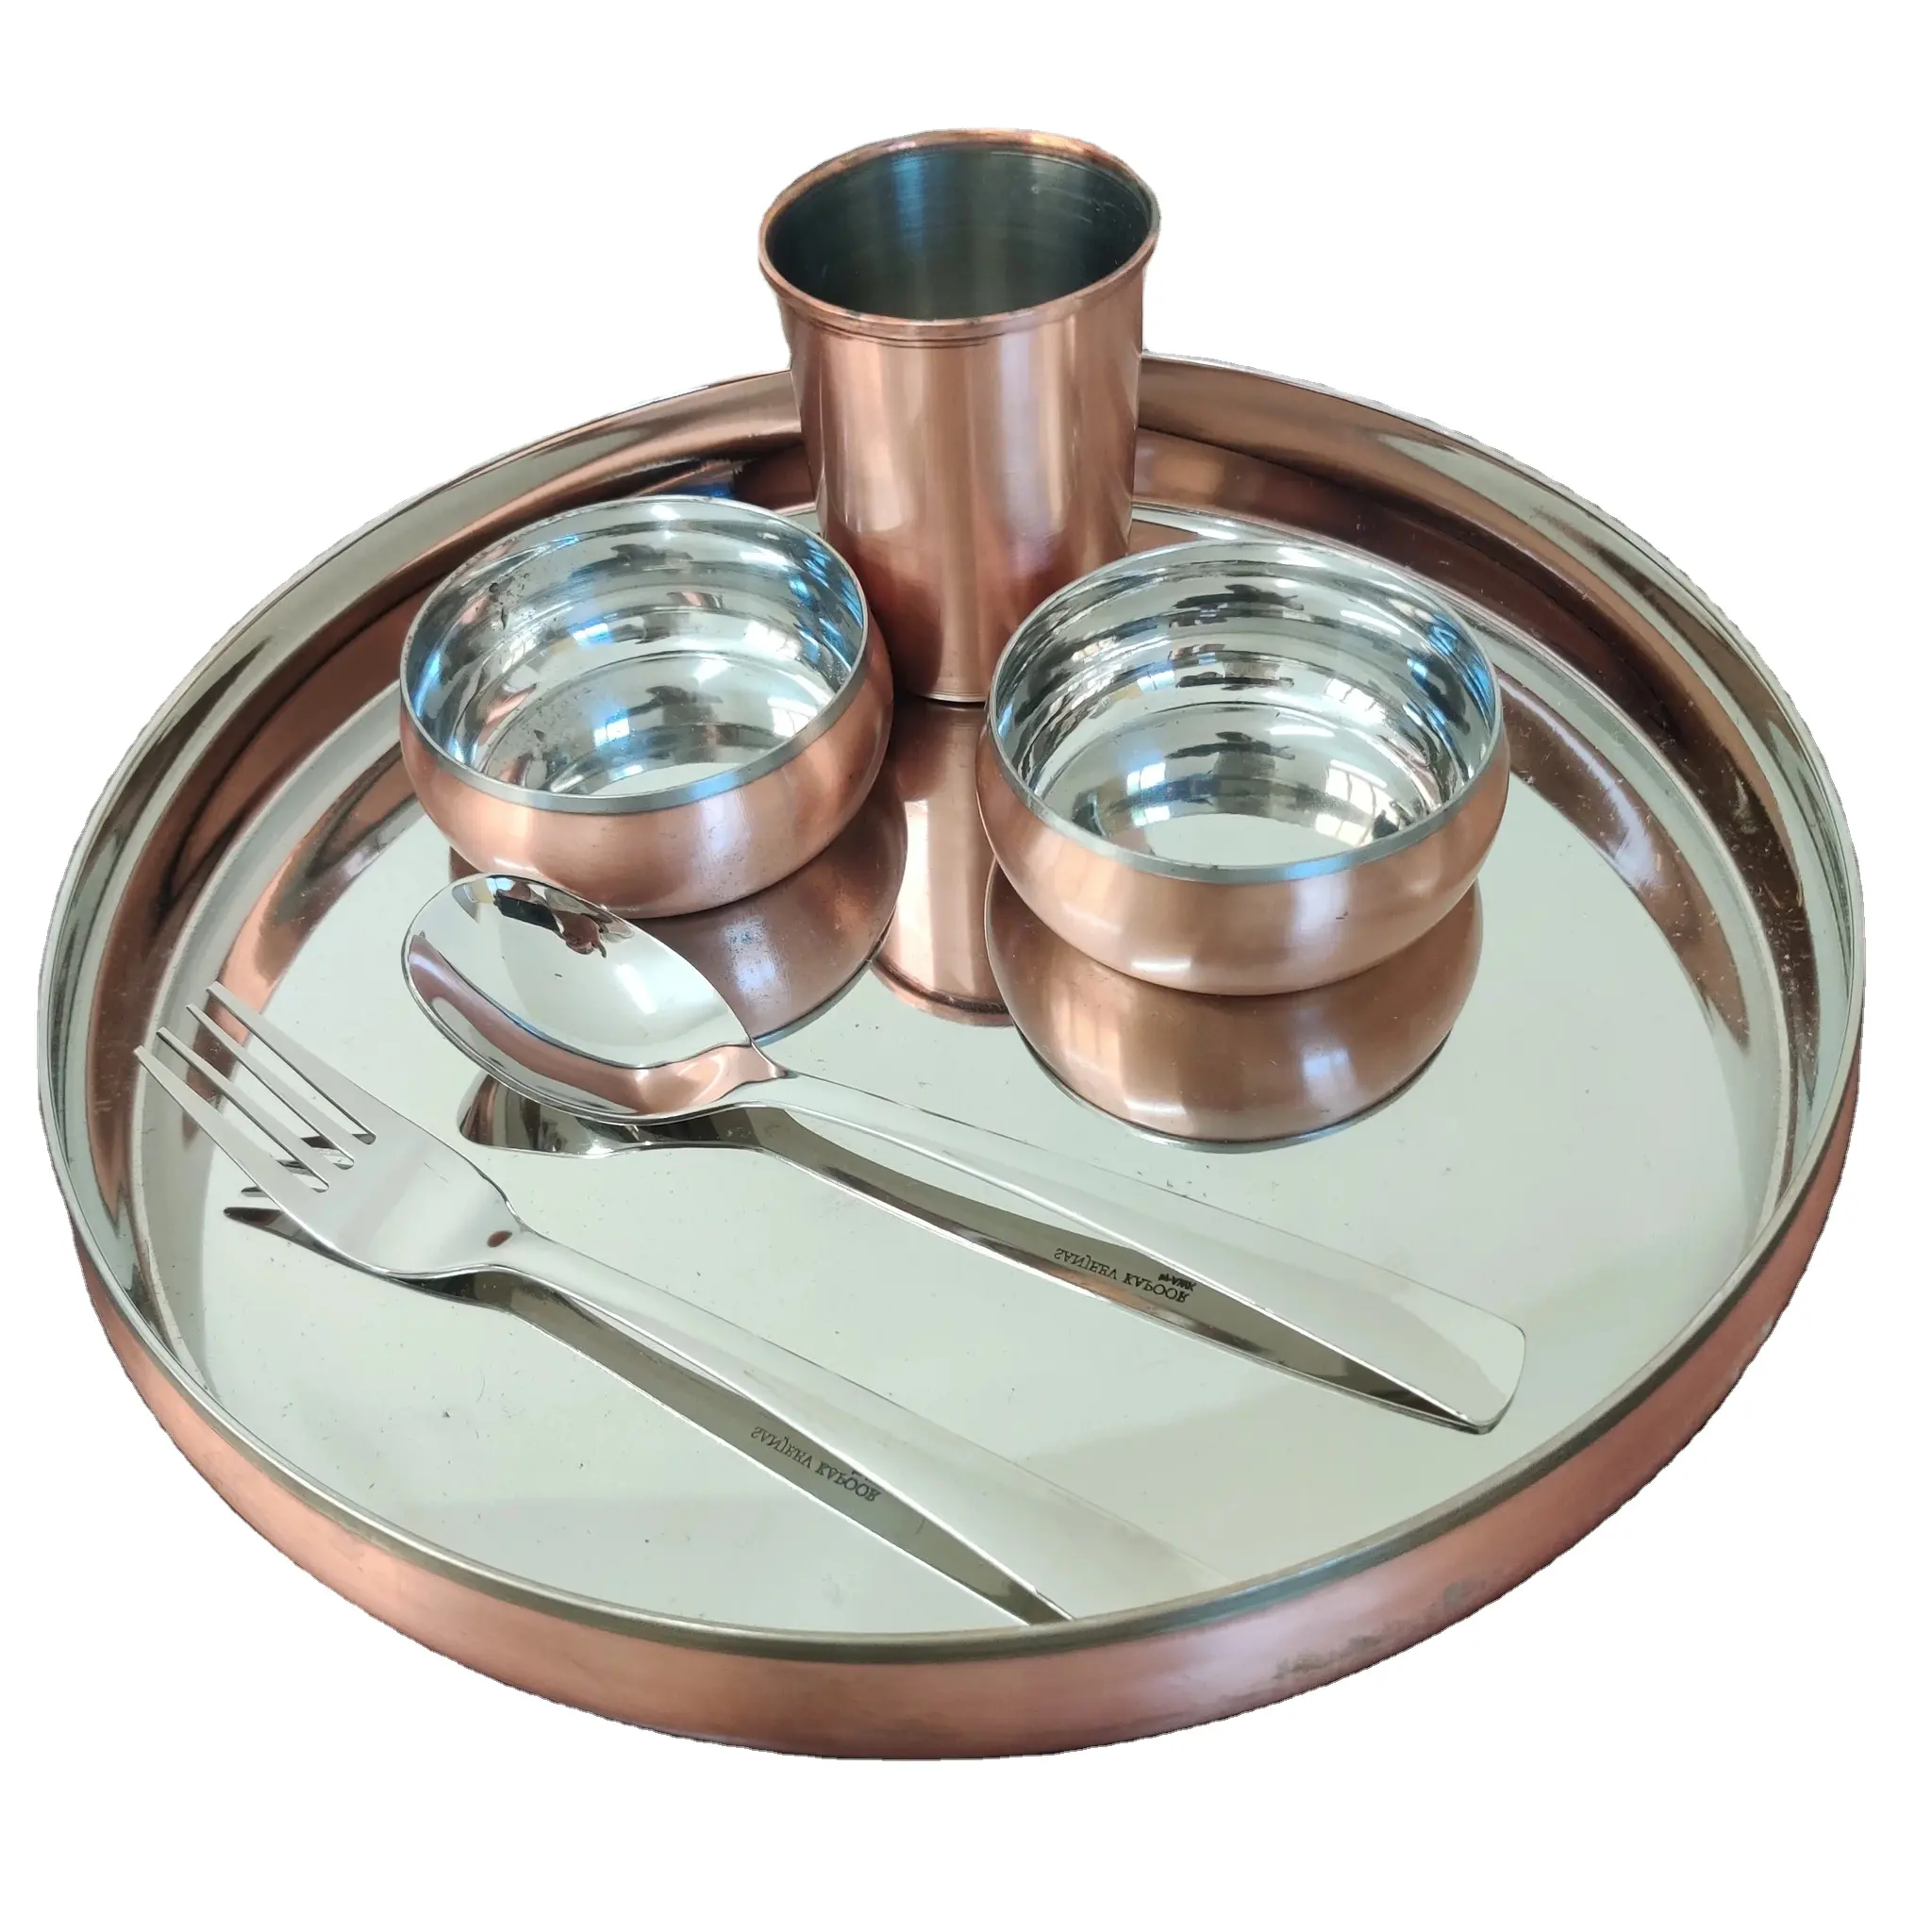 Copper Hammered Traditional Crockery Set Of Thali Plates Bowls Glass And Spoon Serving Tableware Copper Traditional Dinner set